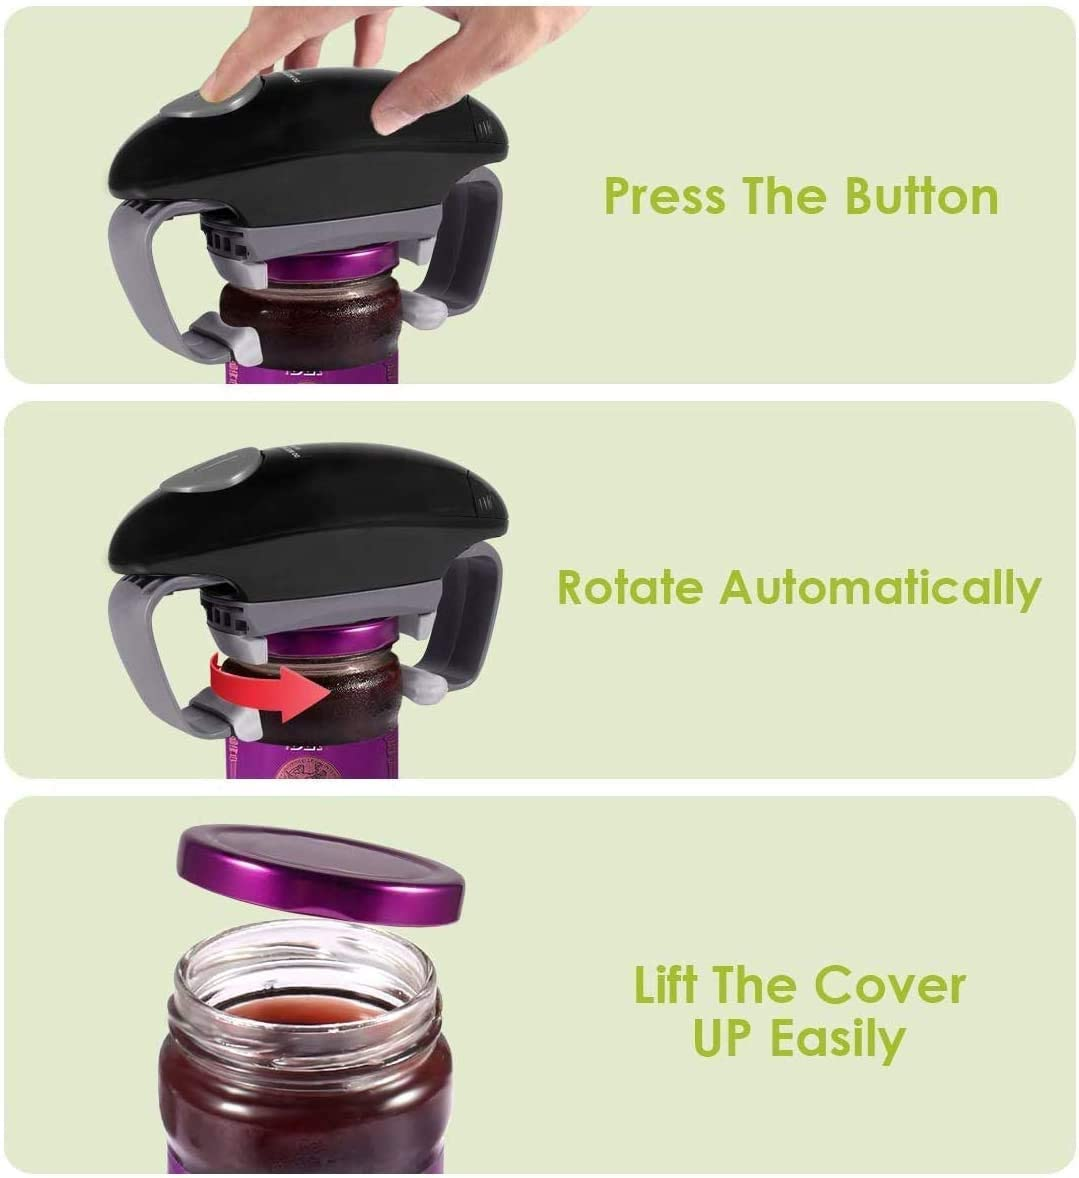 Strong Tough Automatic Jar Opener